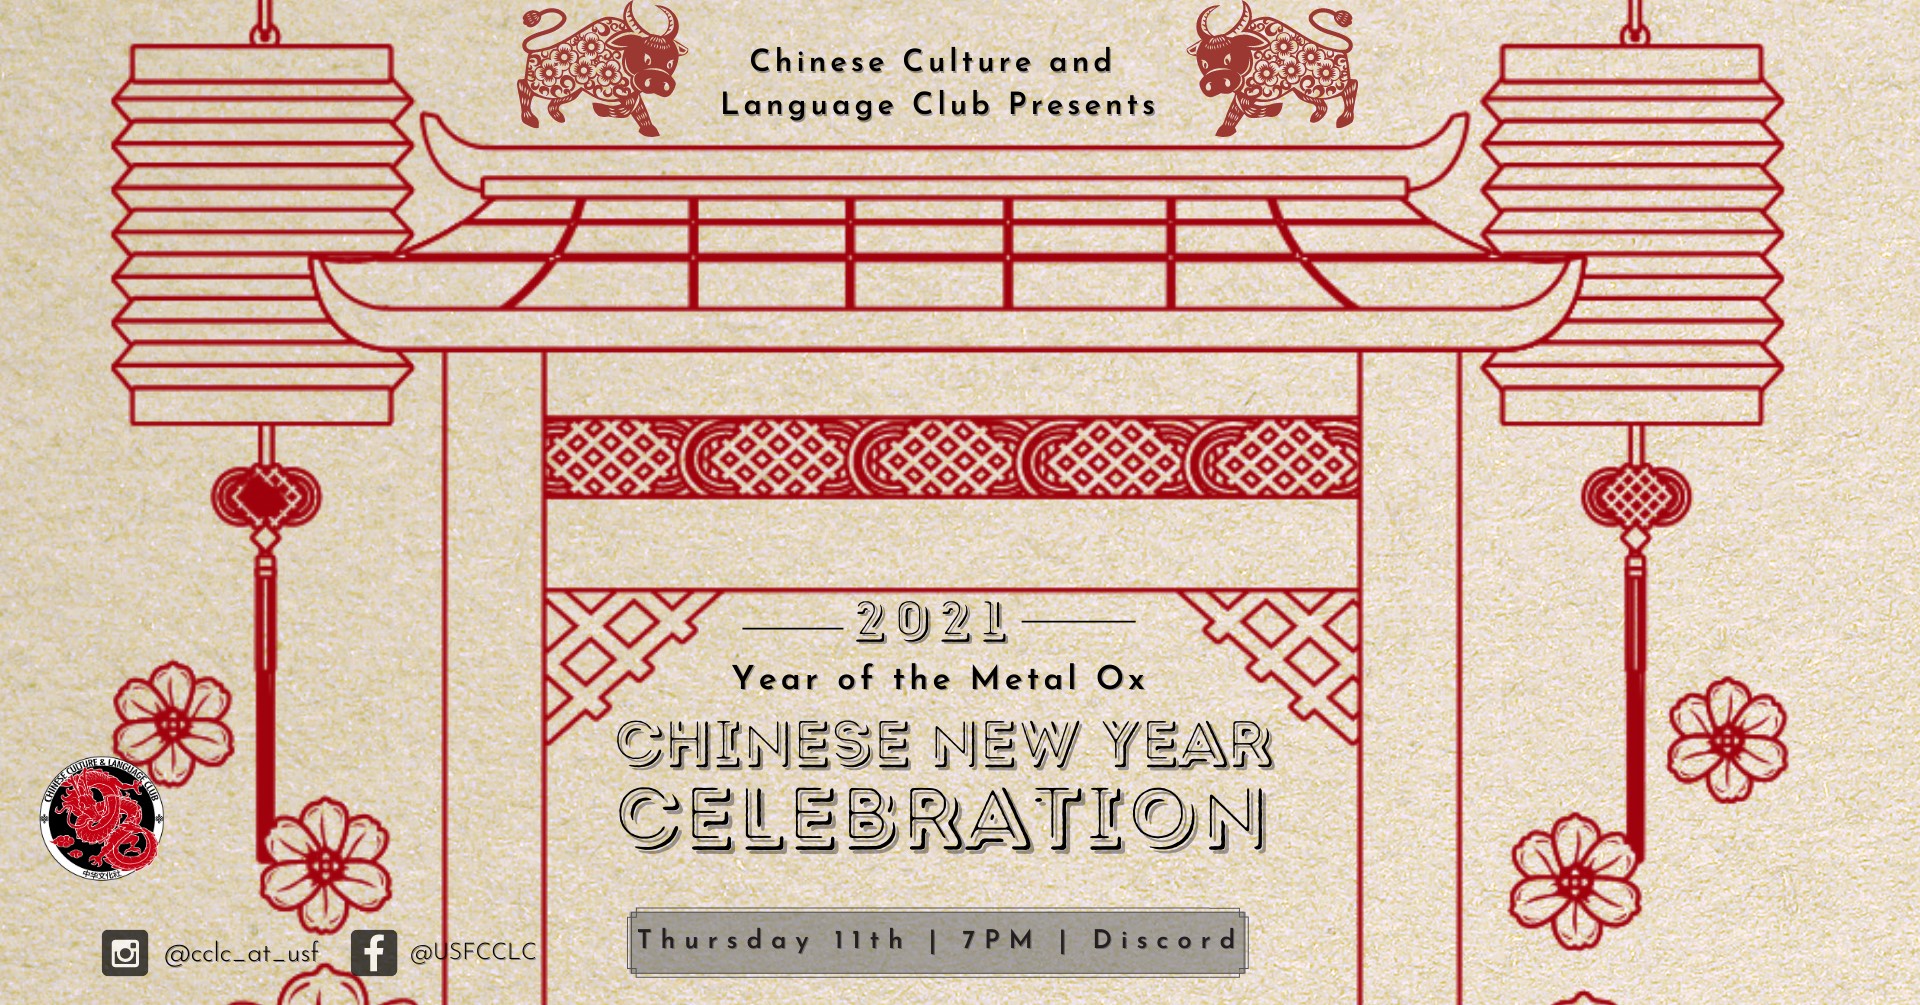 CCLC 5th ANNUAL CHINESE NEW YEAR CELEBRATION